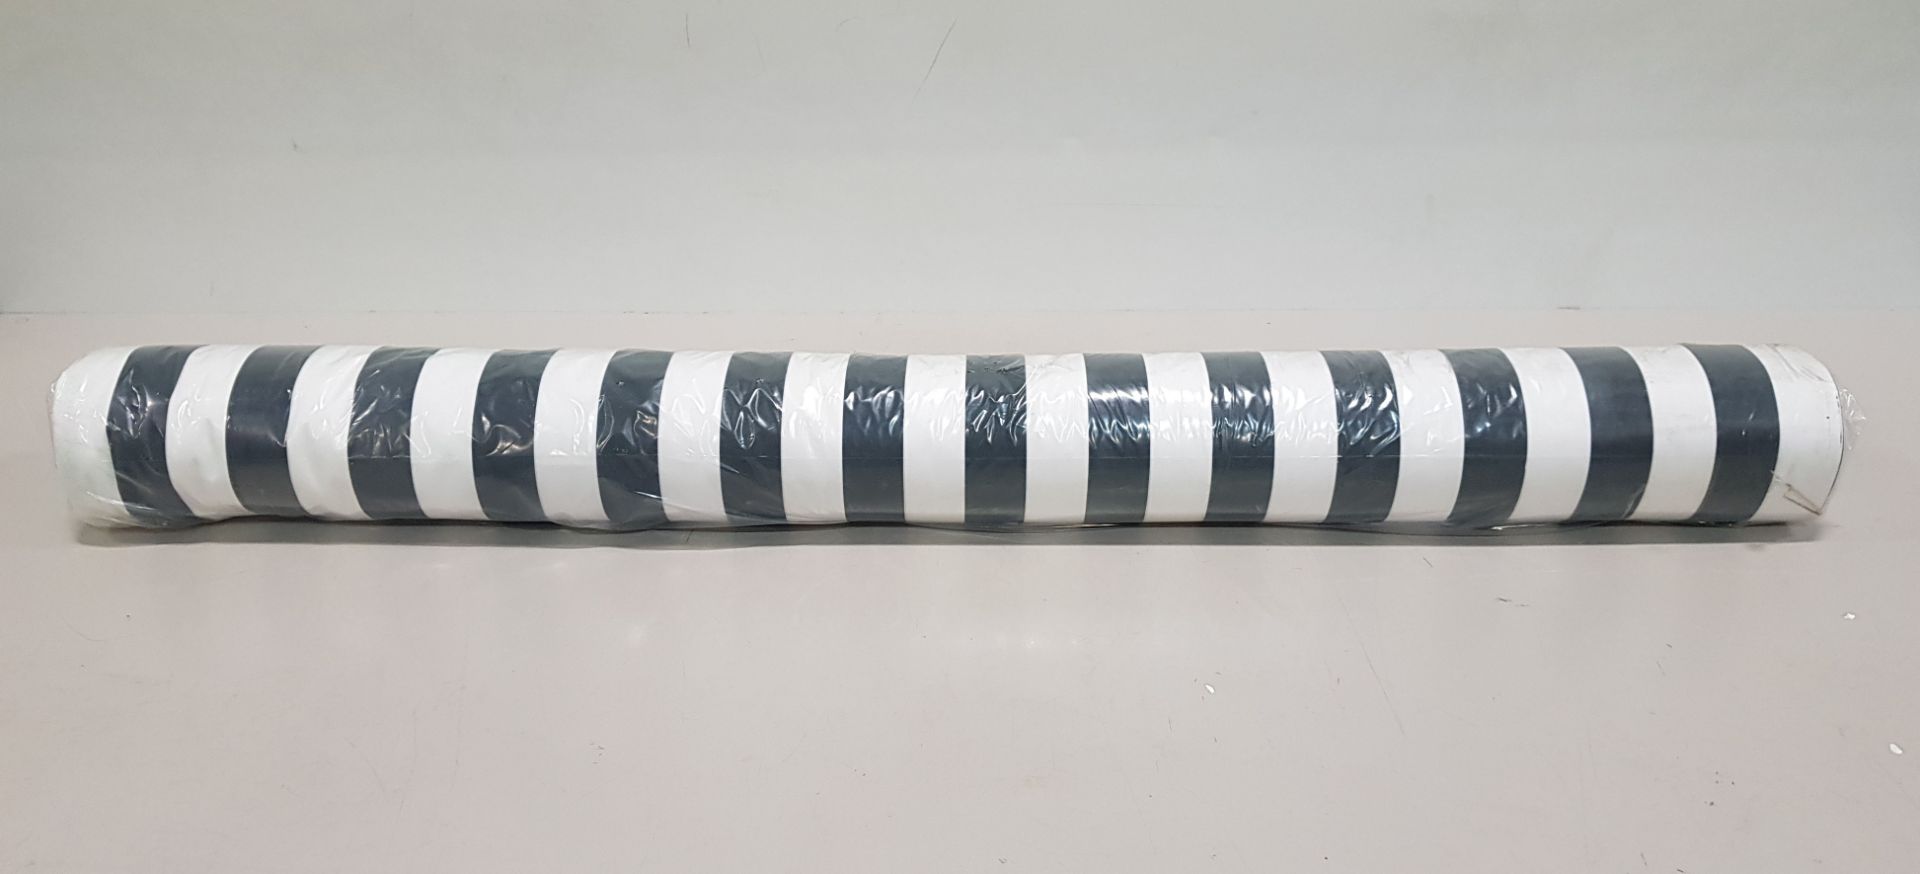 1 X ROLL OF FABRIC IN BLACK AND WHITE LINED DESIGN - THE LENGTH 50 M - RRP £12.99 / M - TOTAL £649.